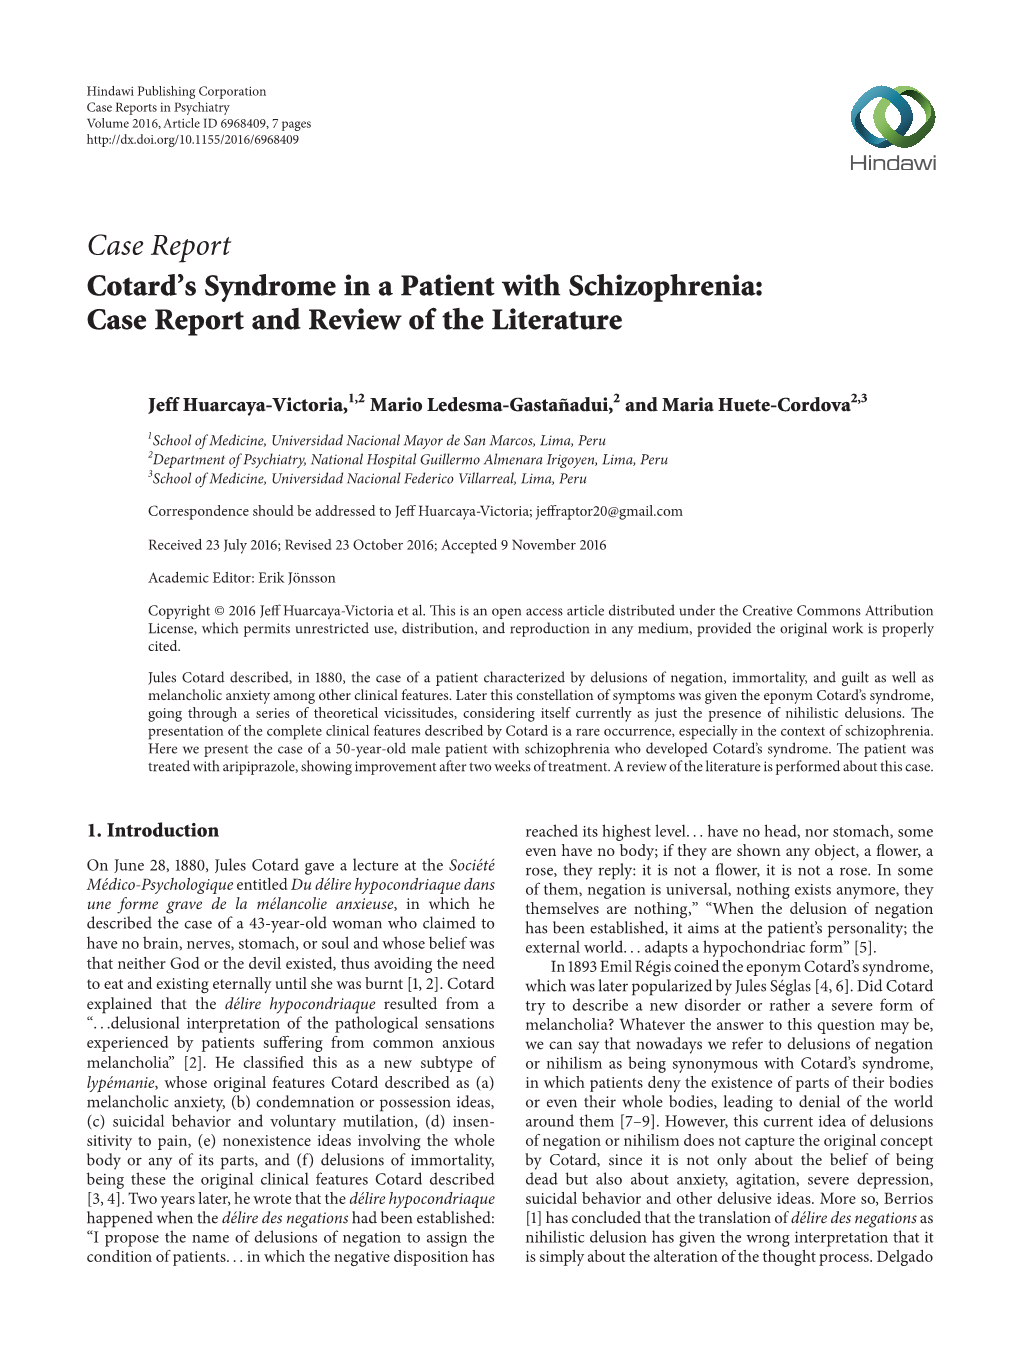 Cotard's Syndrome in a Patient with Schizophrenia: Case Report And